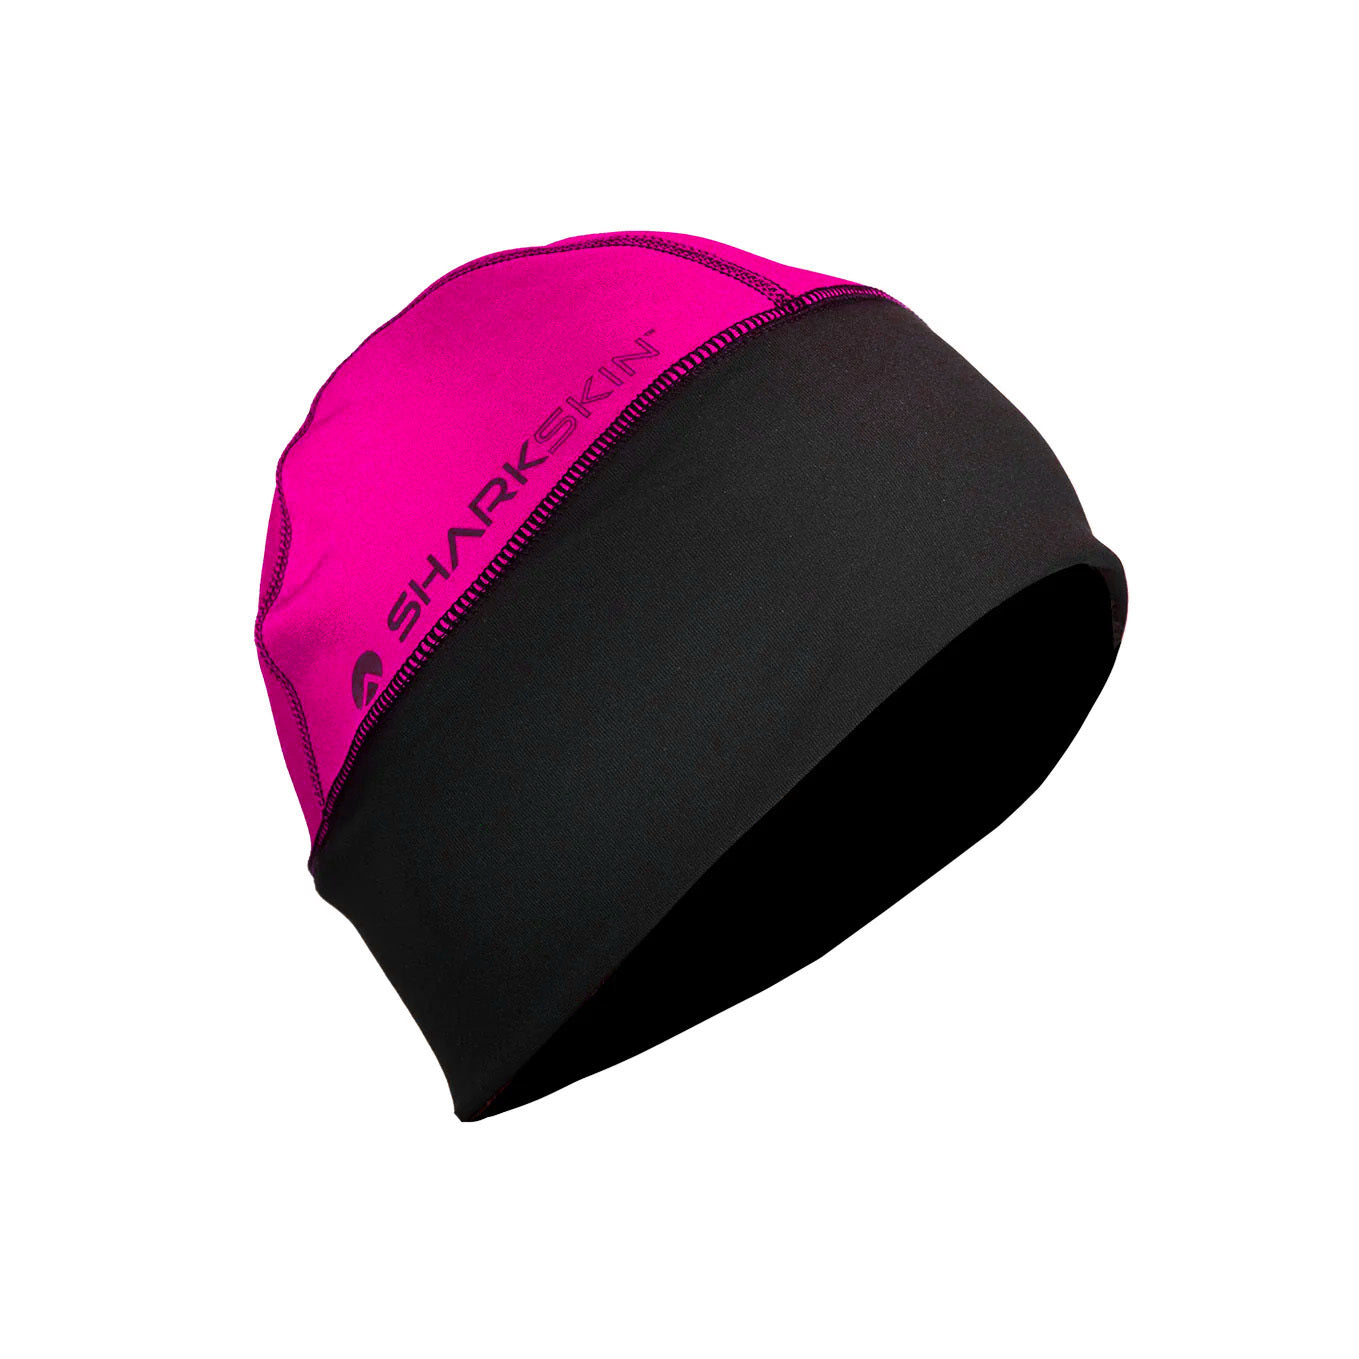 CHILLPROOF BEANIE (SECONDS)